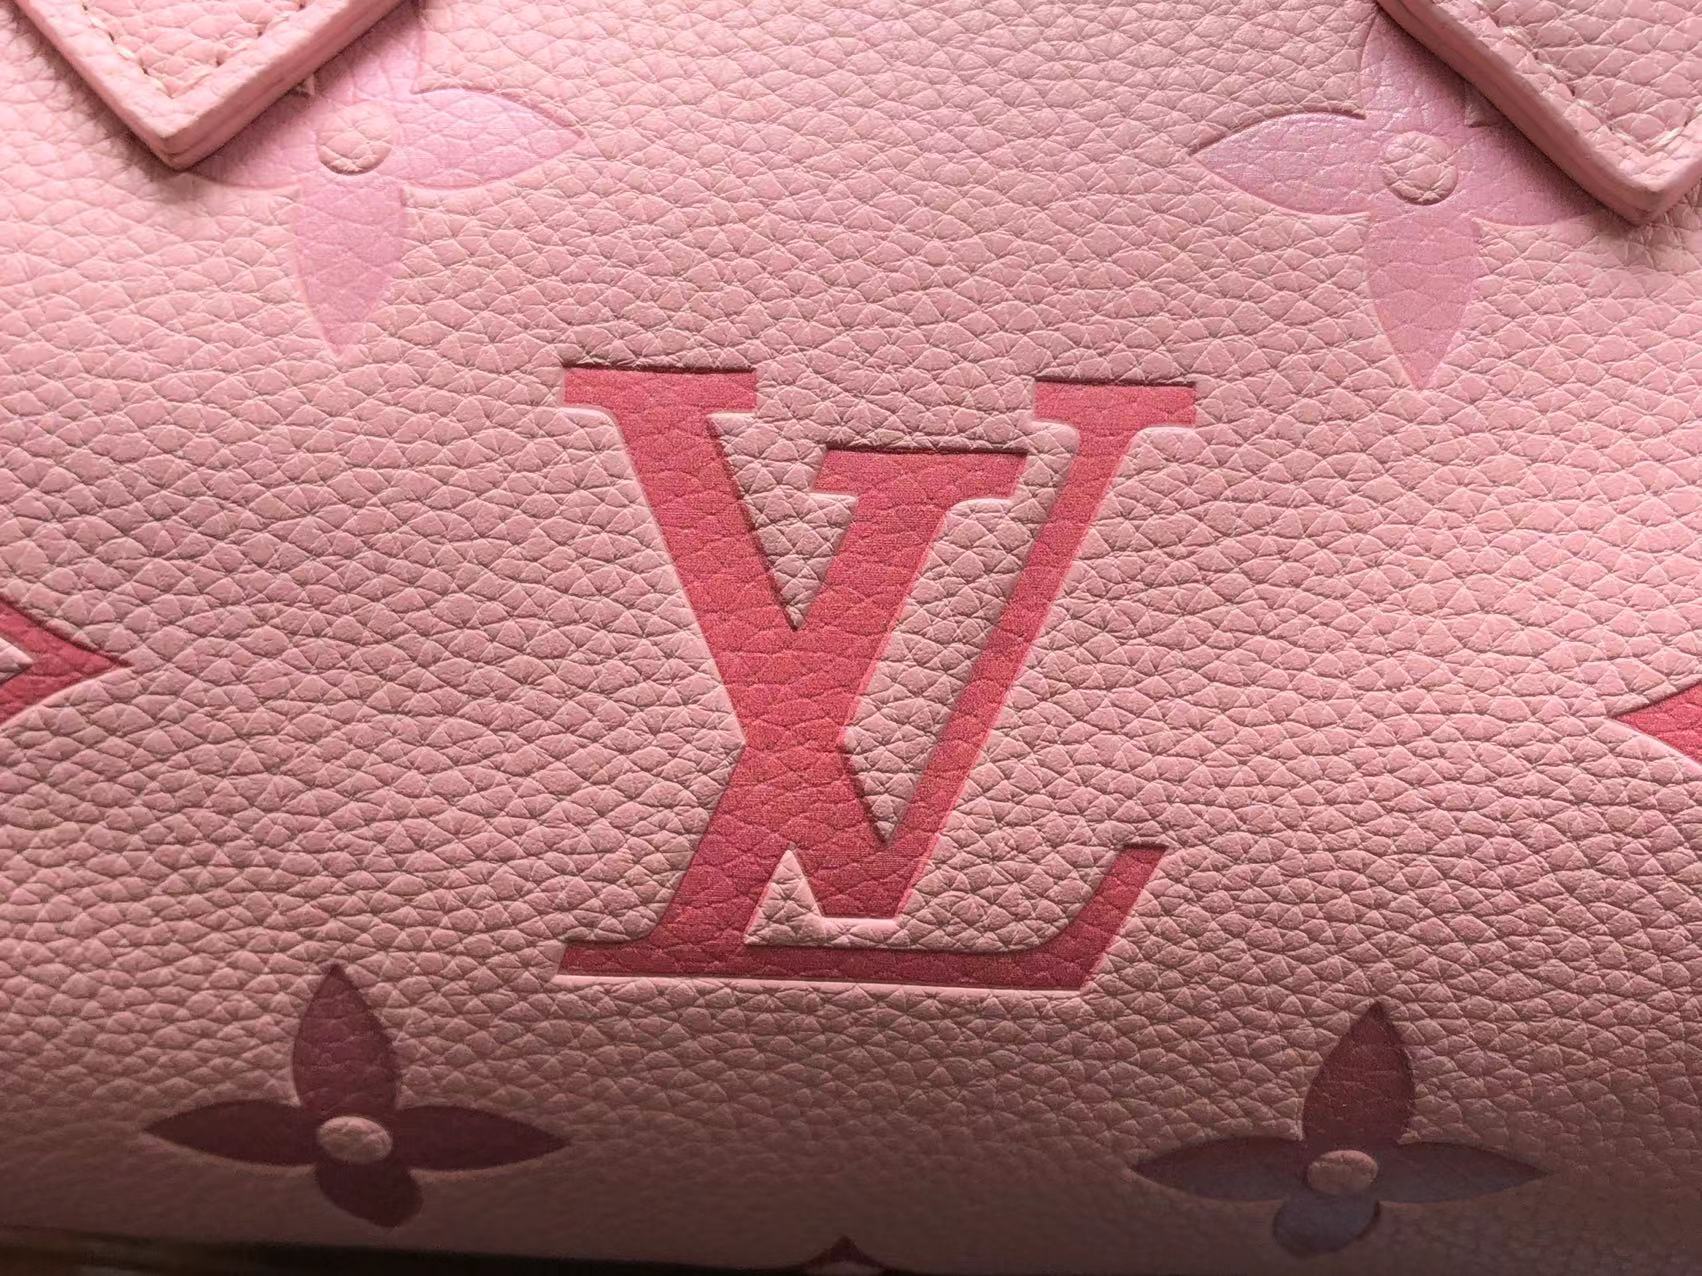 The Louis Vuitton By The Pool BAG: Style in Motion